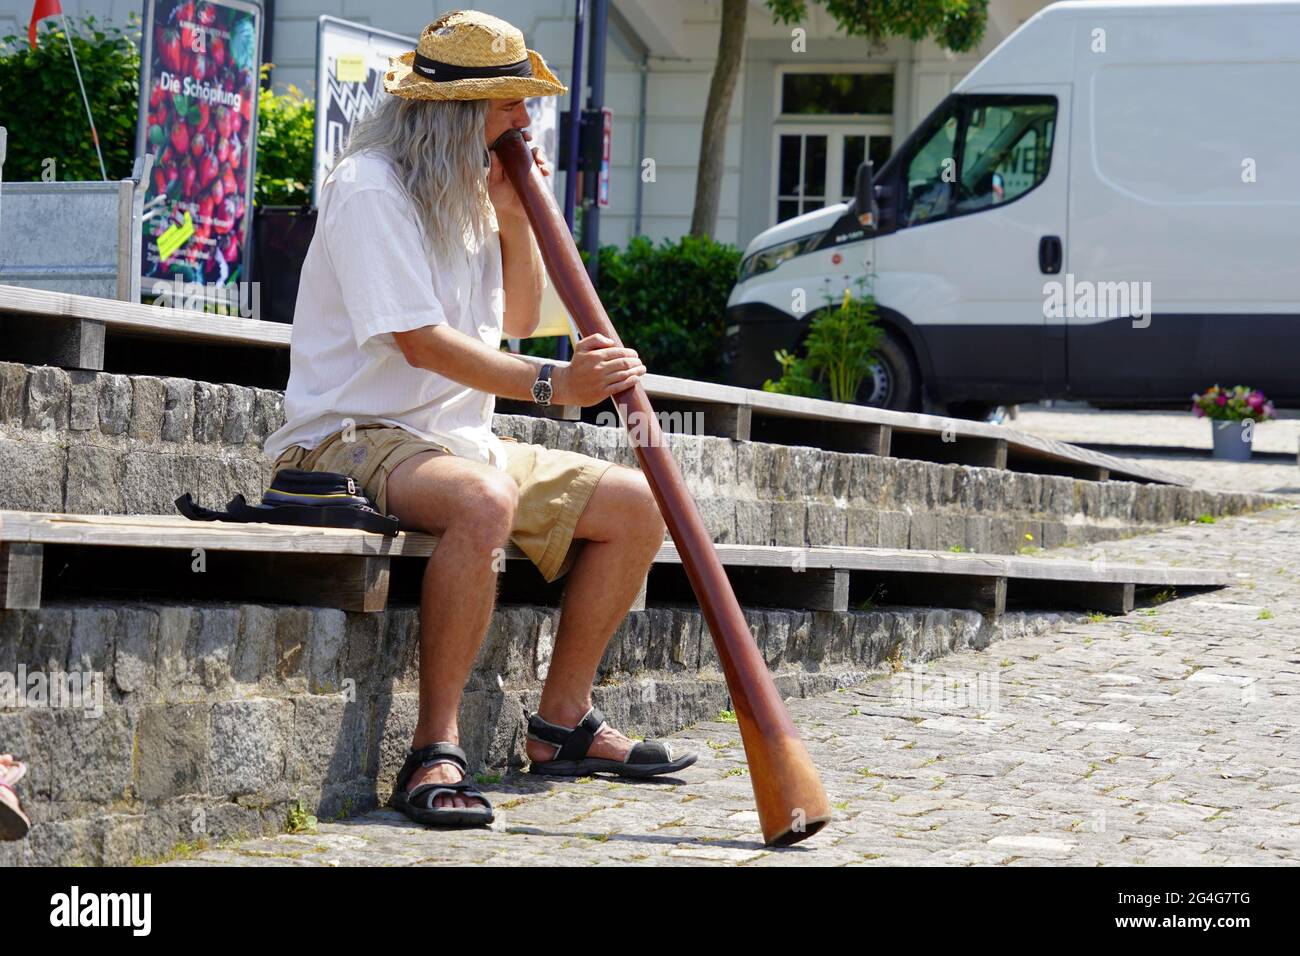 Man playing a didgeridoo in city Zug in Switzerland. He has long grey hair, is wearing straw hat, white shirt, shorts and sandals. Stock Photo